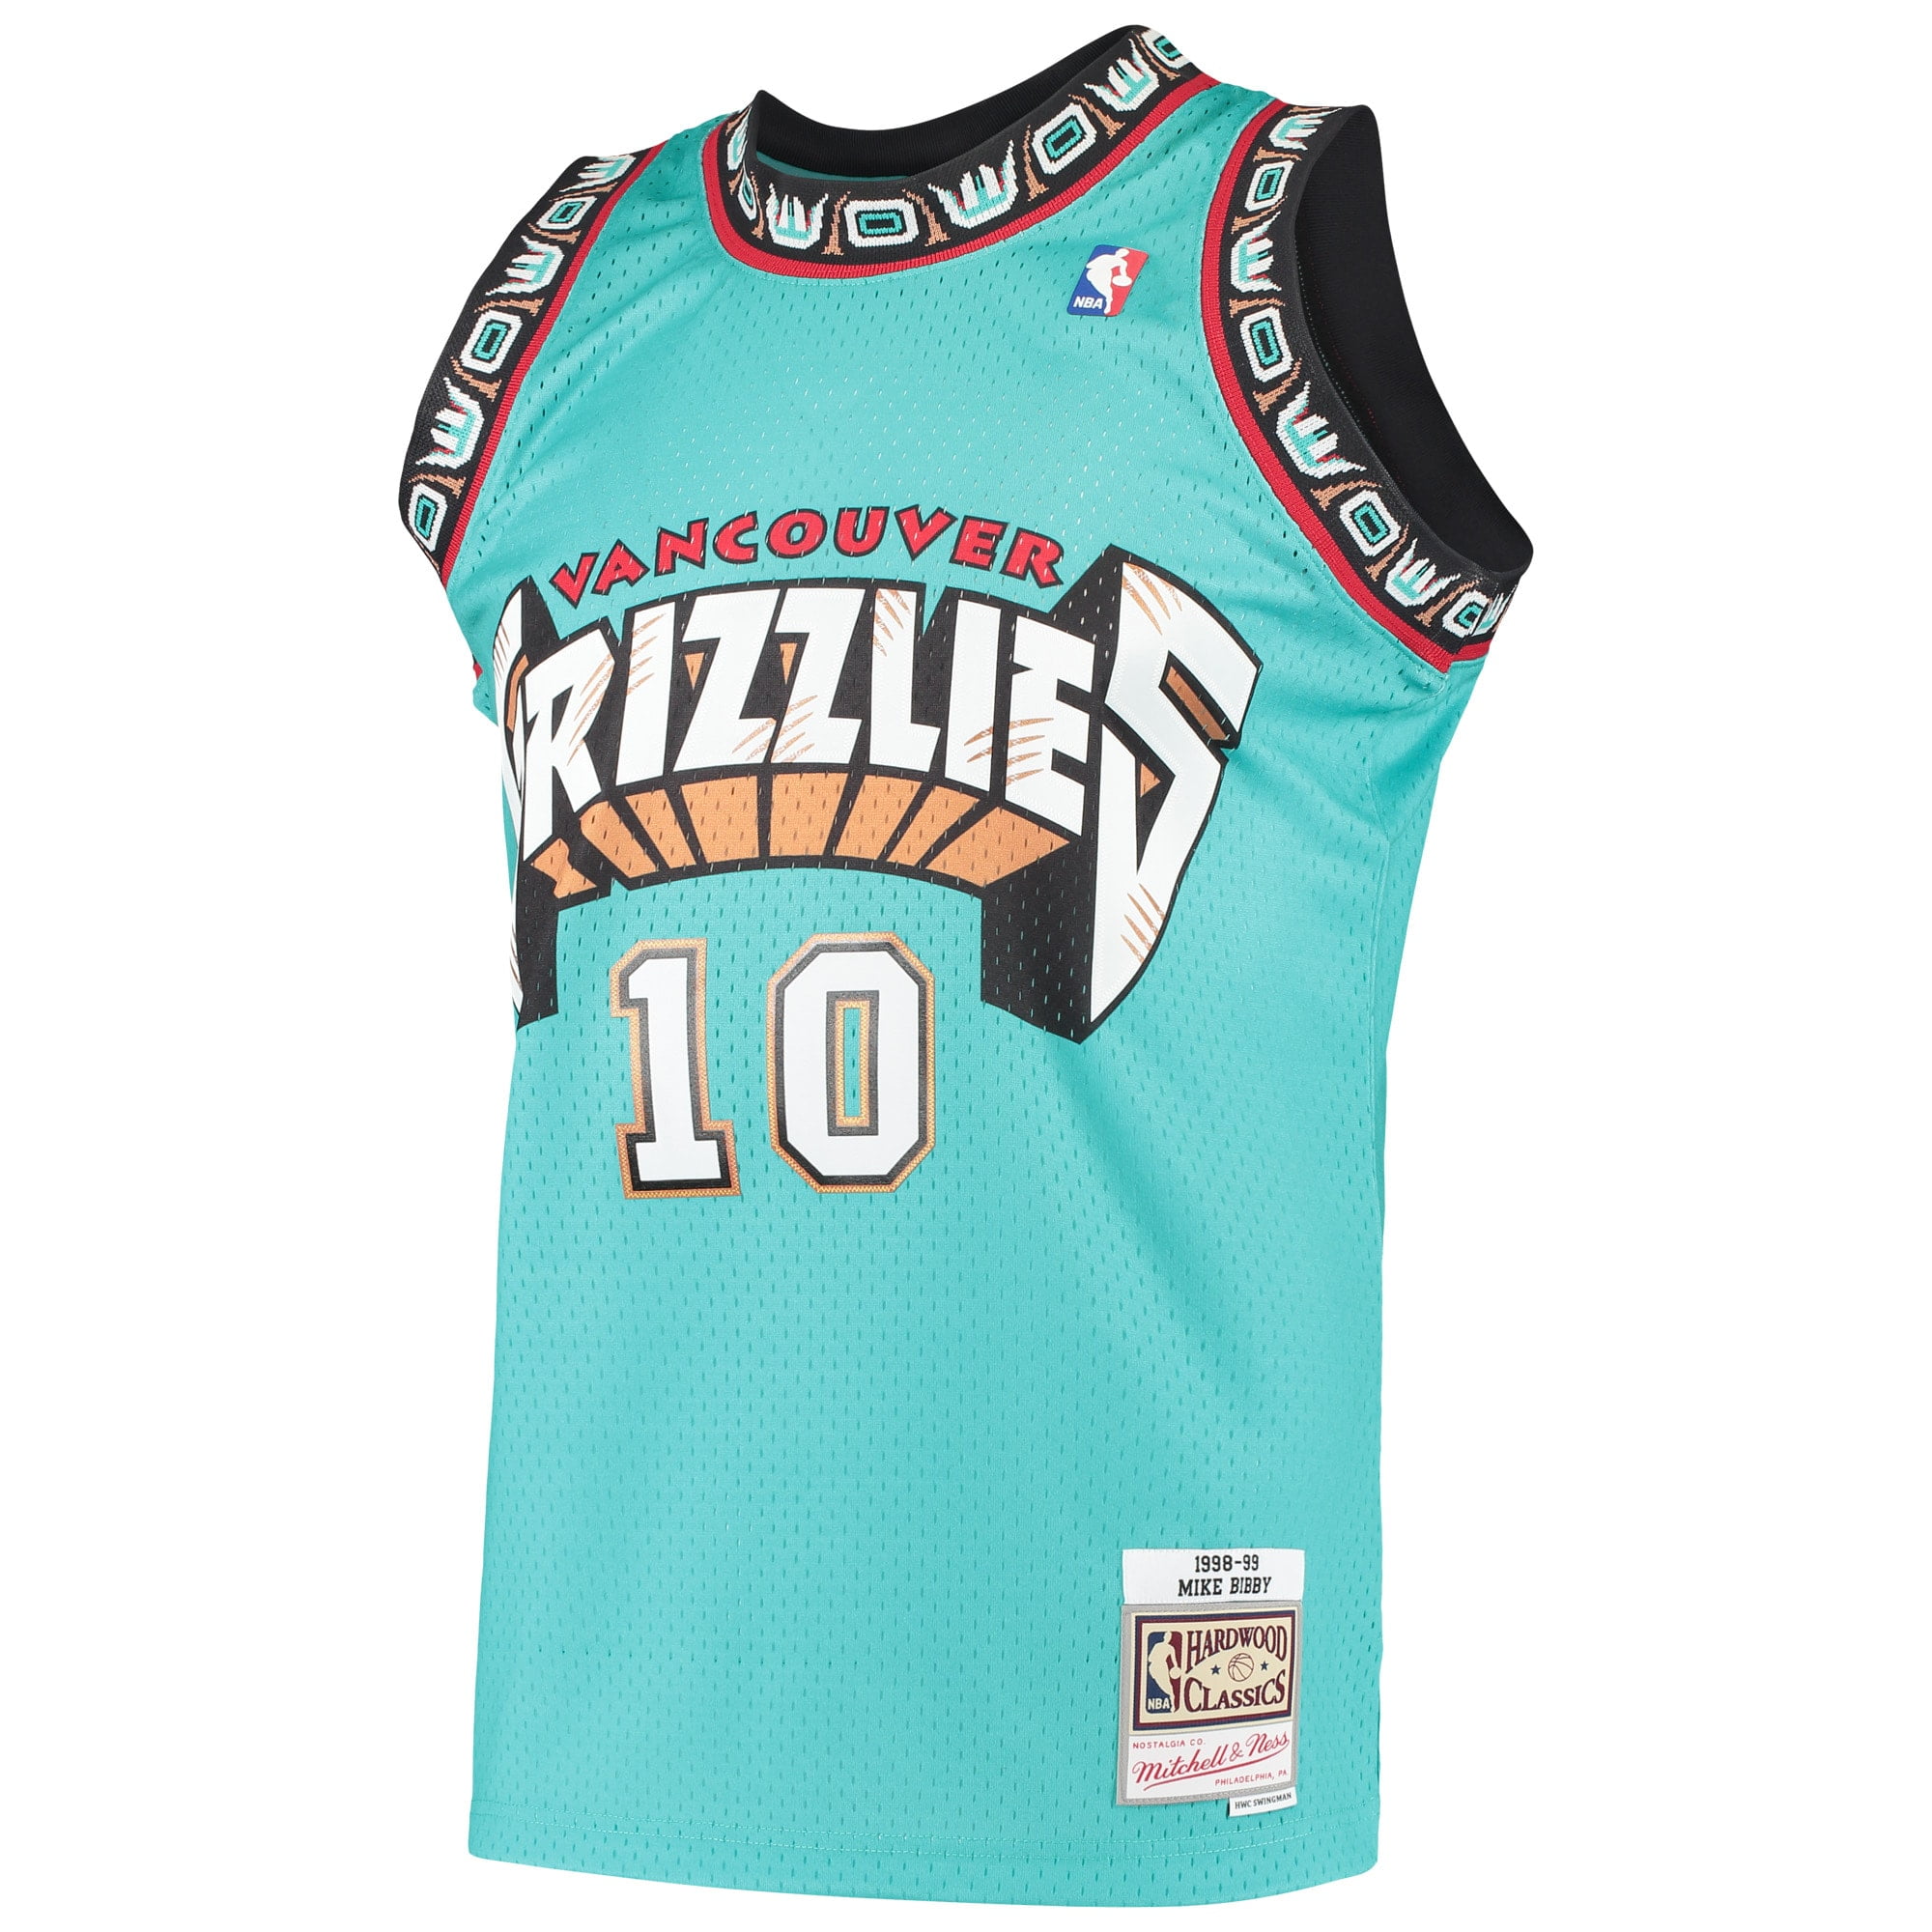 Retro Vancouver Grizzlies Mike Bibby Basketball Shorts Stitched Green 